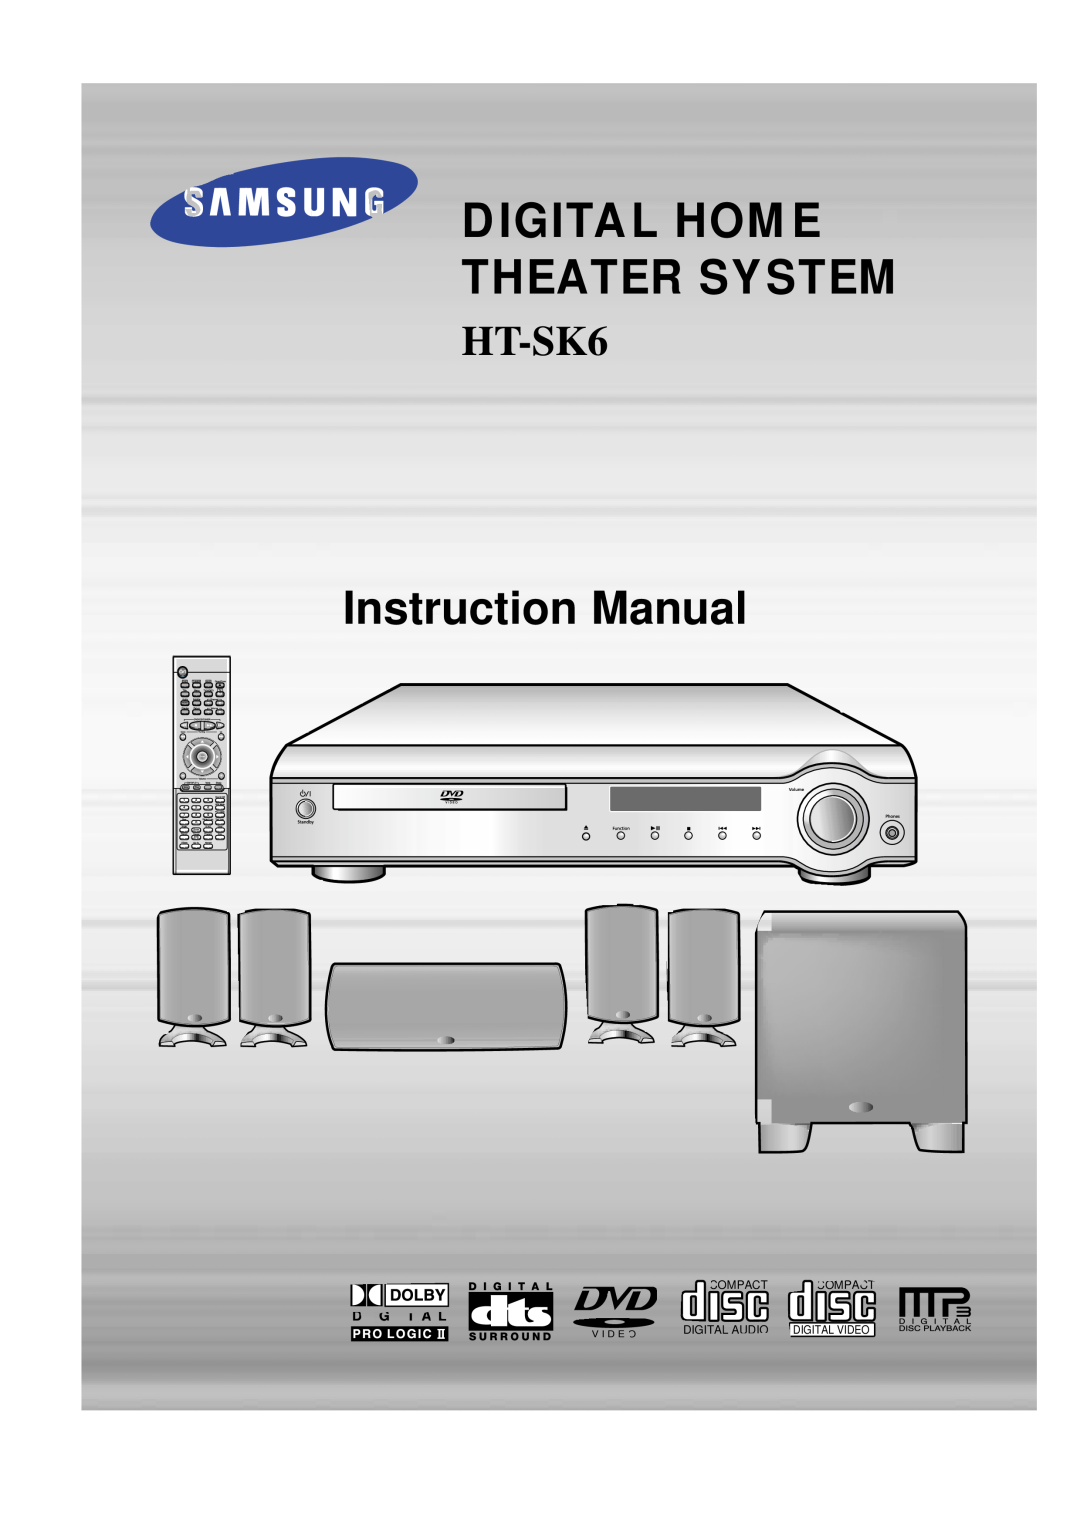 Samsung HT-SK6 instruction manual Digital Home Theater System, Compact Compact, Digital Audio 